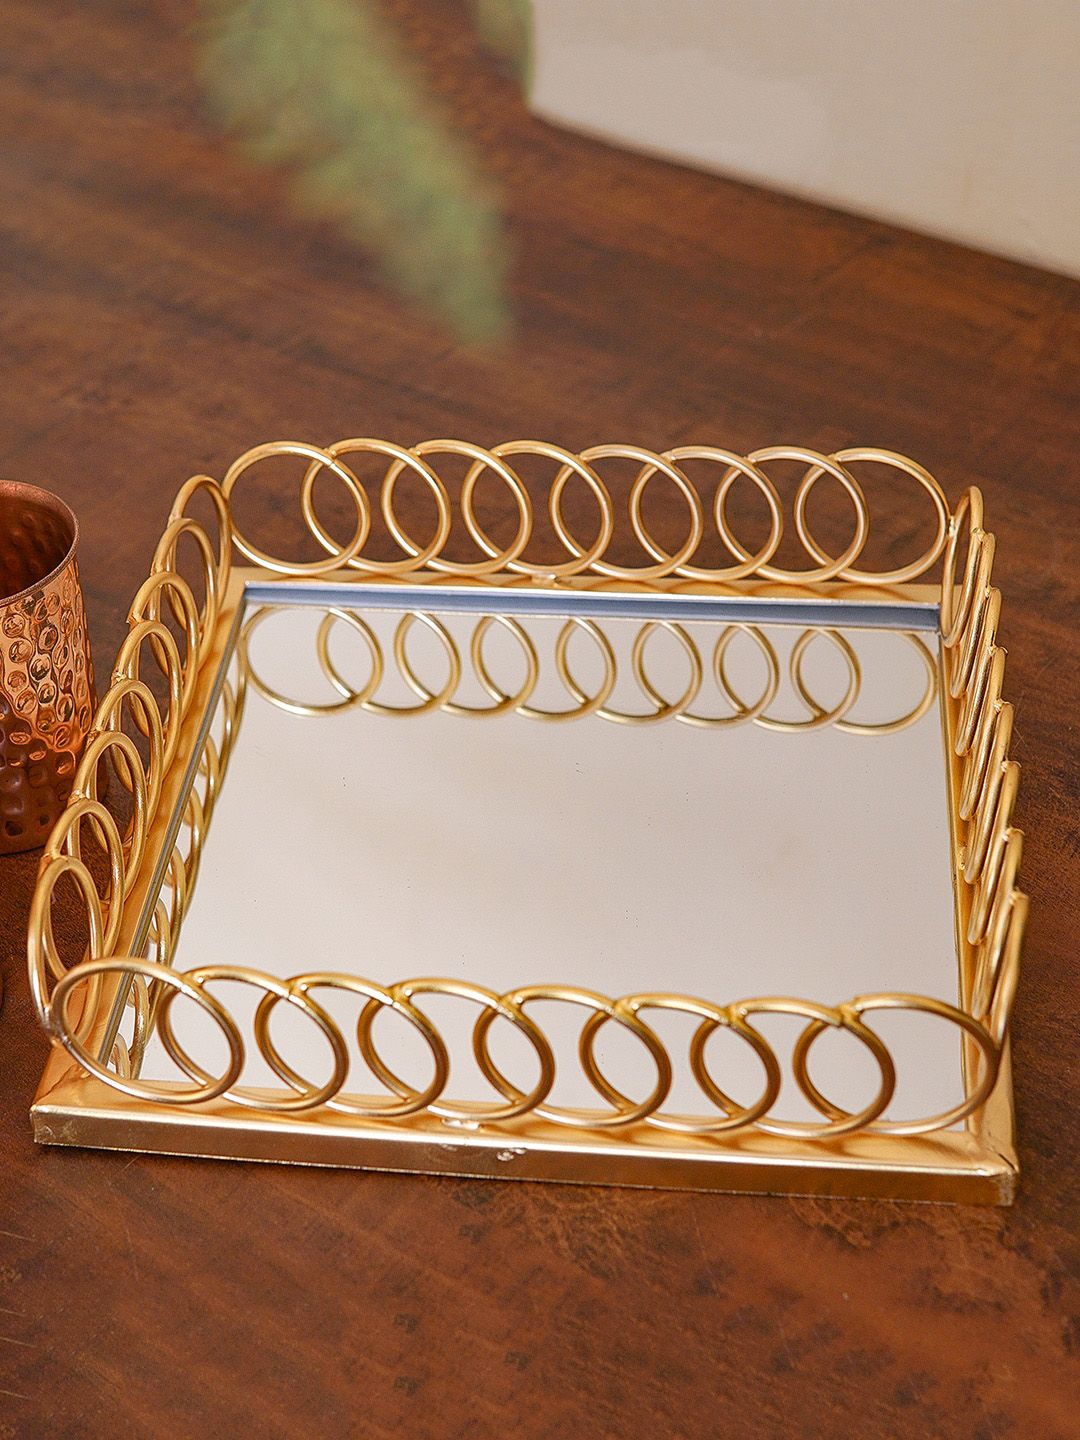 StatueStudio Gold-Toned Serving Tray With Mirror Price in India